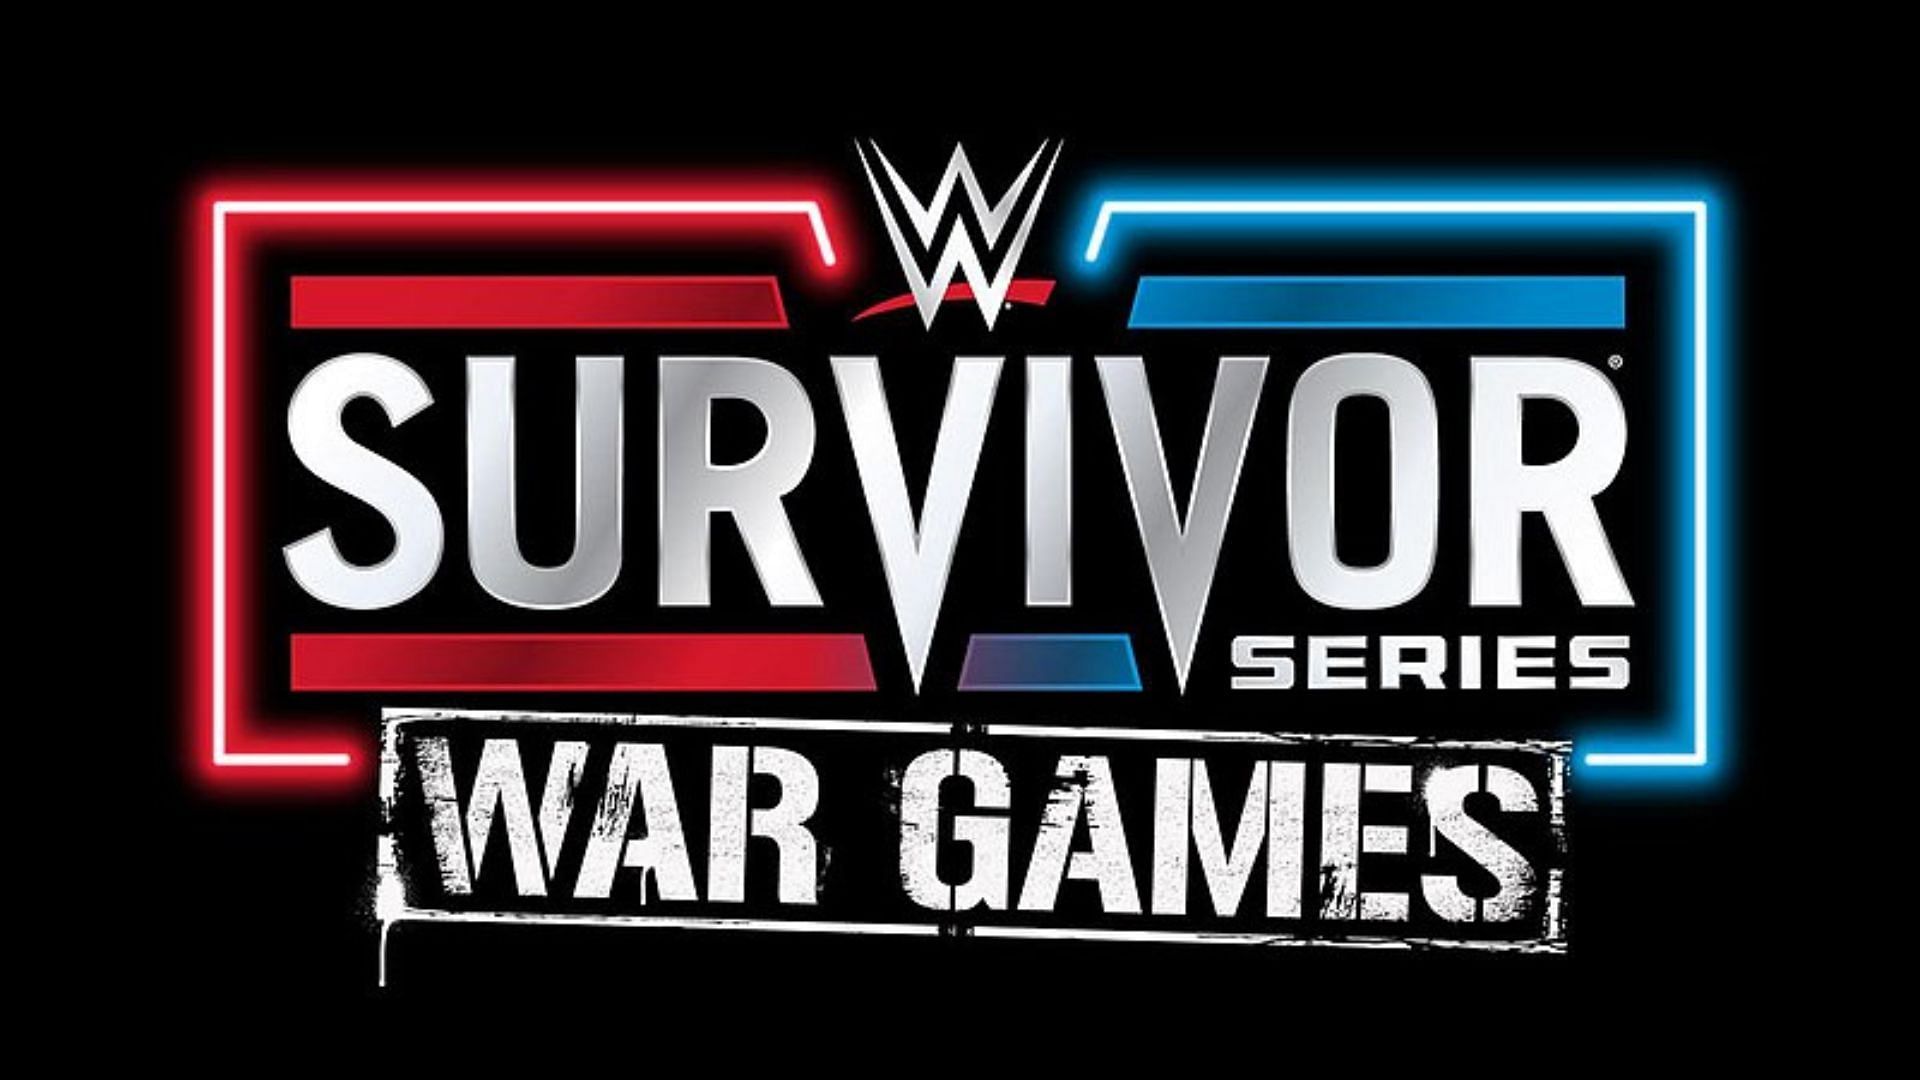 When and where is WWE Survivor Series 2022?